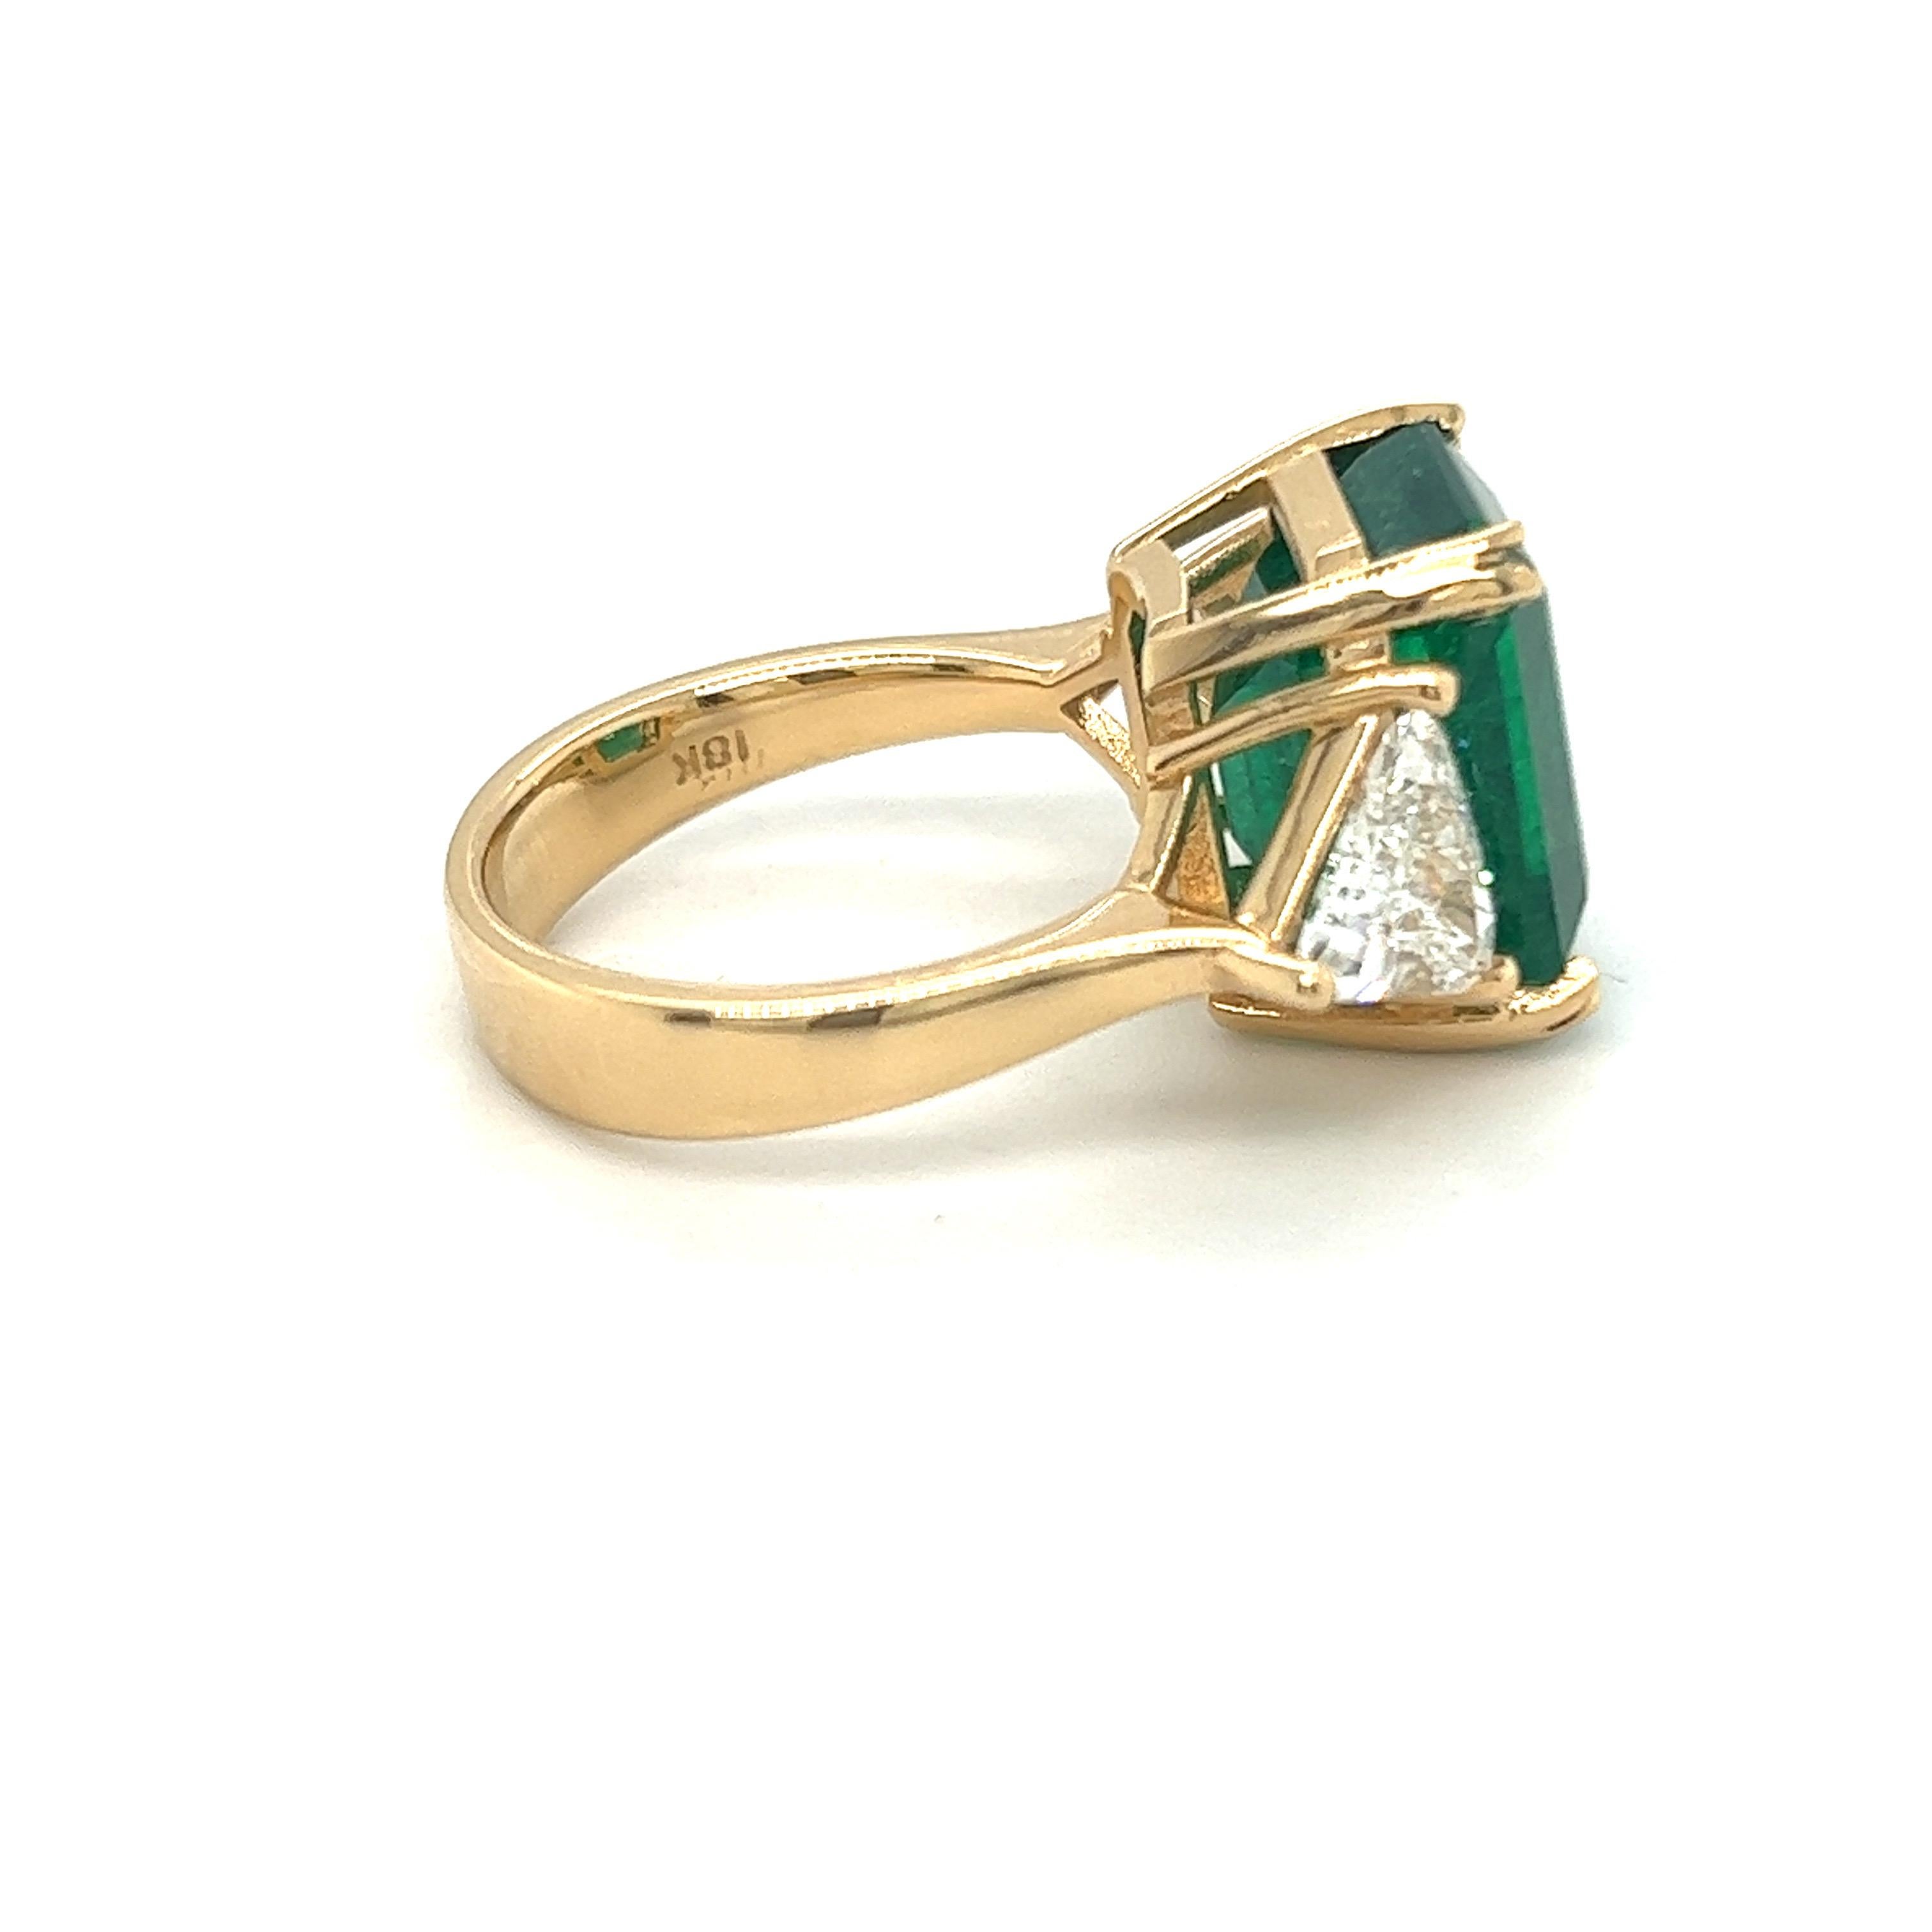 Emerald Cut 9.72 Carat GIA Certified Emerald Ring with 1.86 Carat SI1 Natural Diamonds For Sale